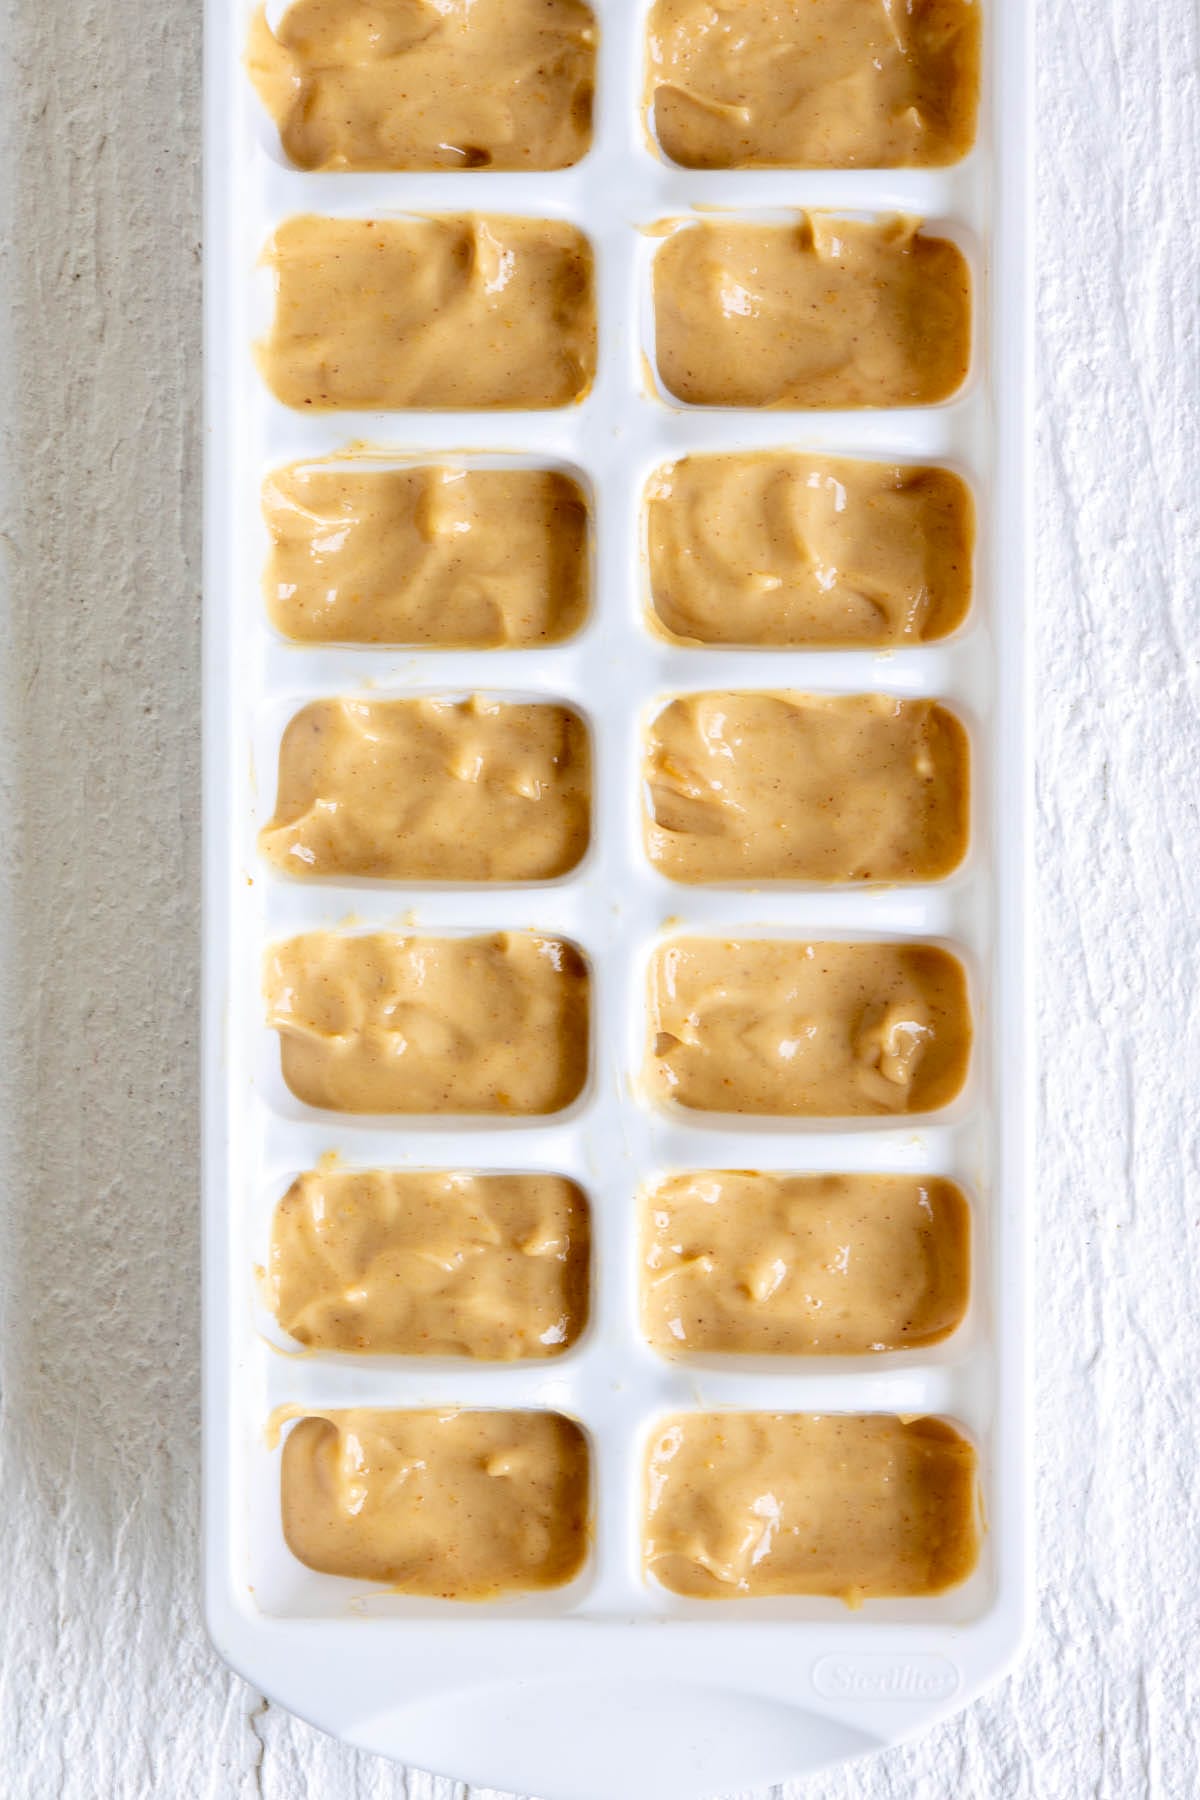 Peanut butter filling in an ice cube tray before freezing.